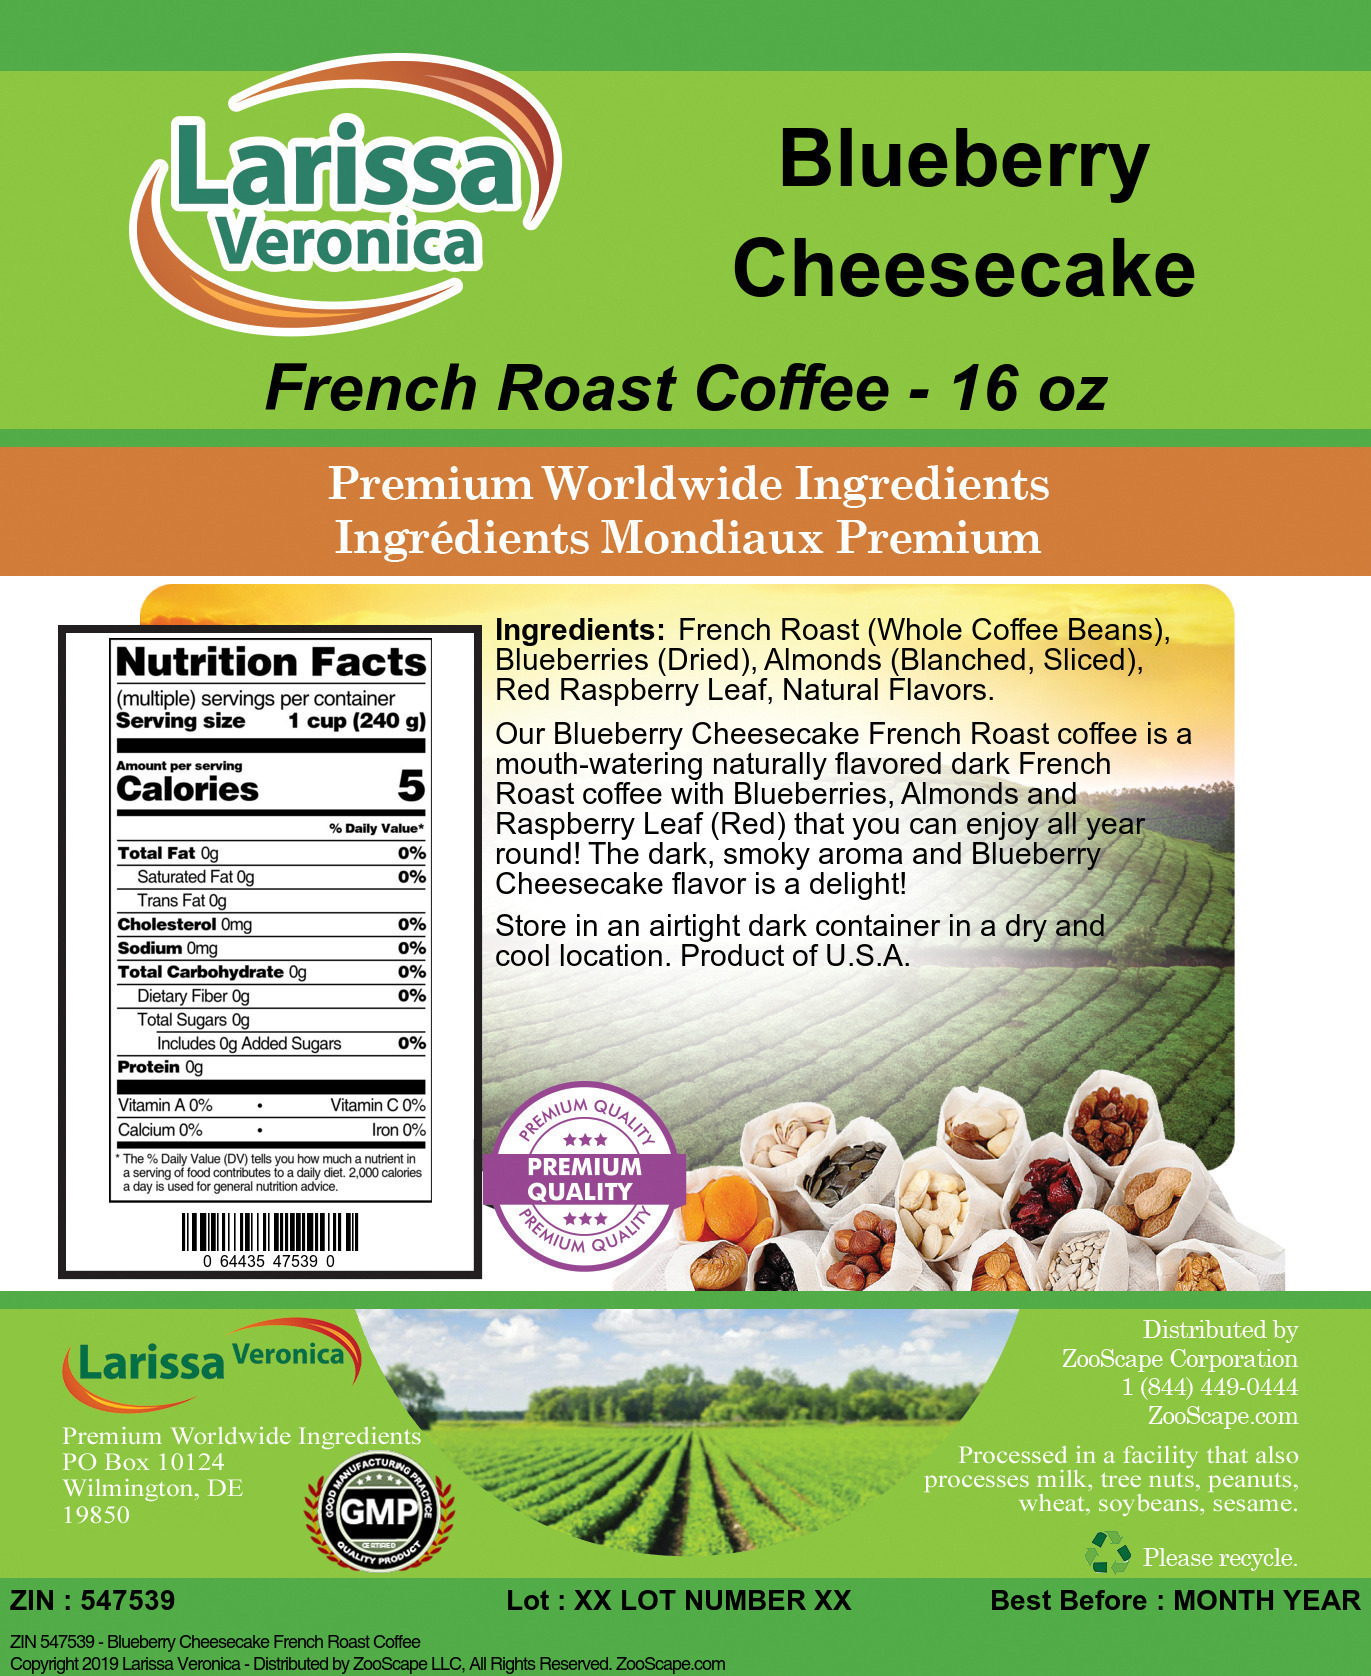 Blueberry Cheesecake French Roast Coffee - Label